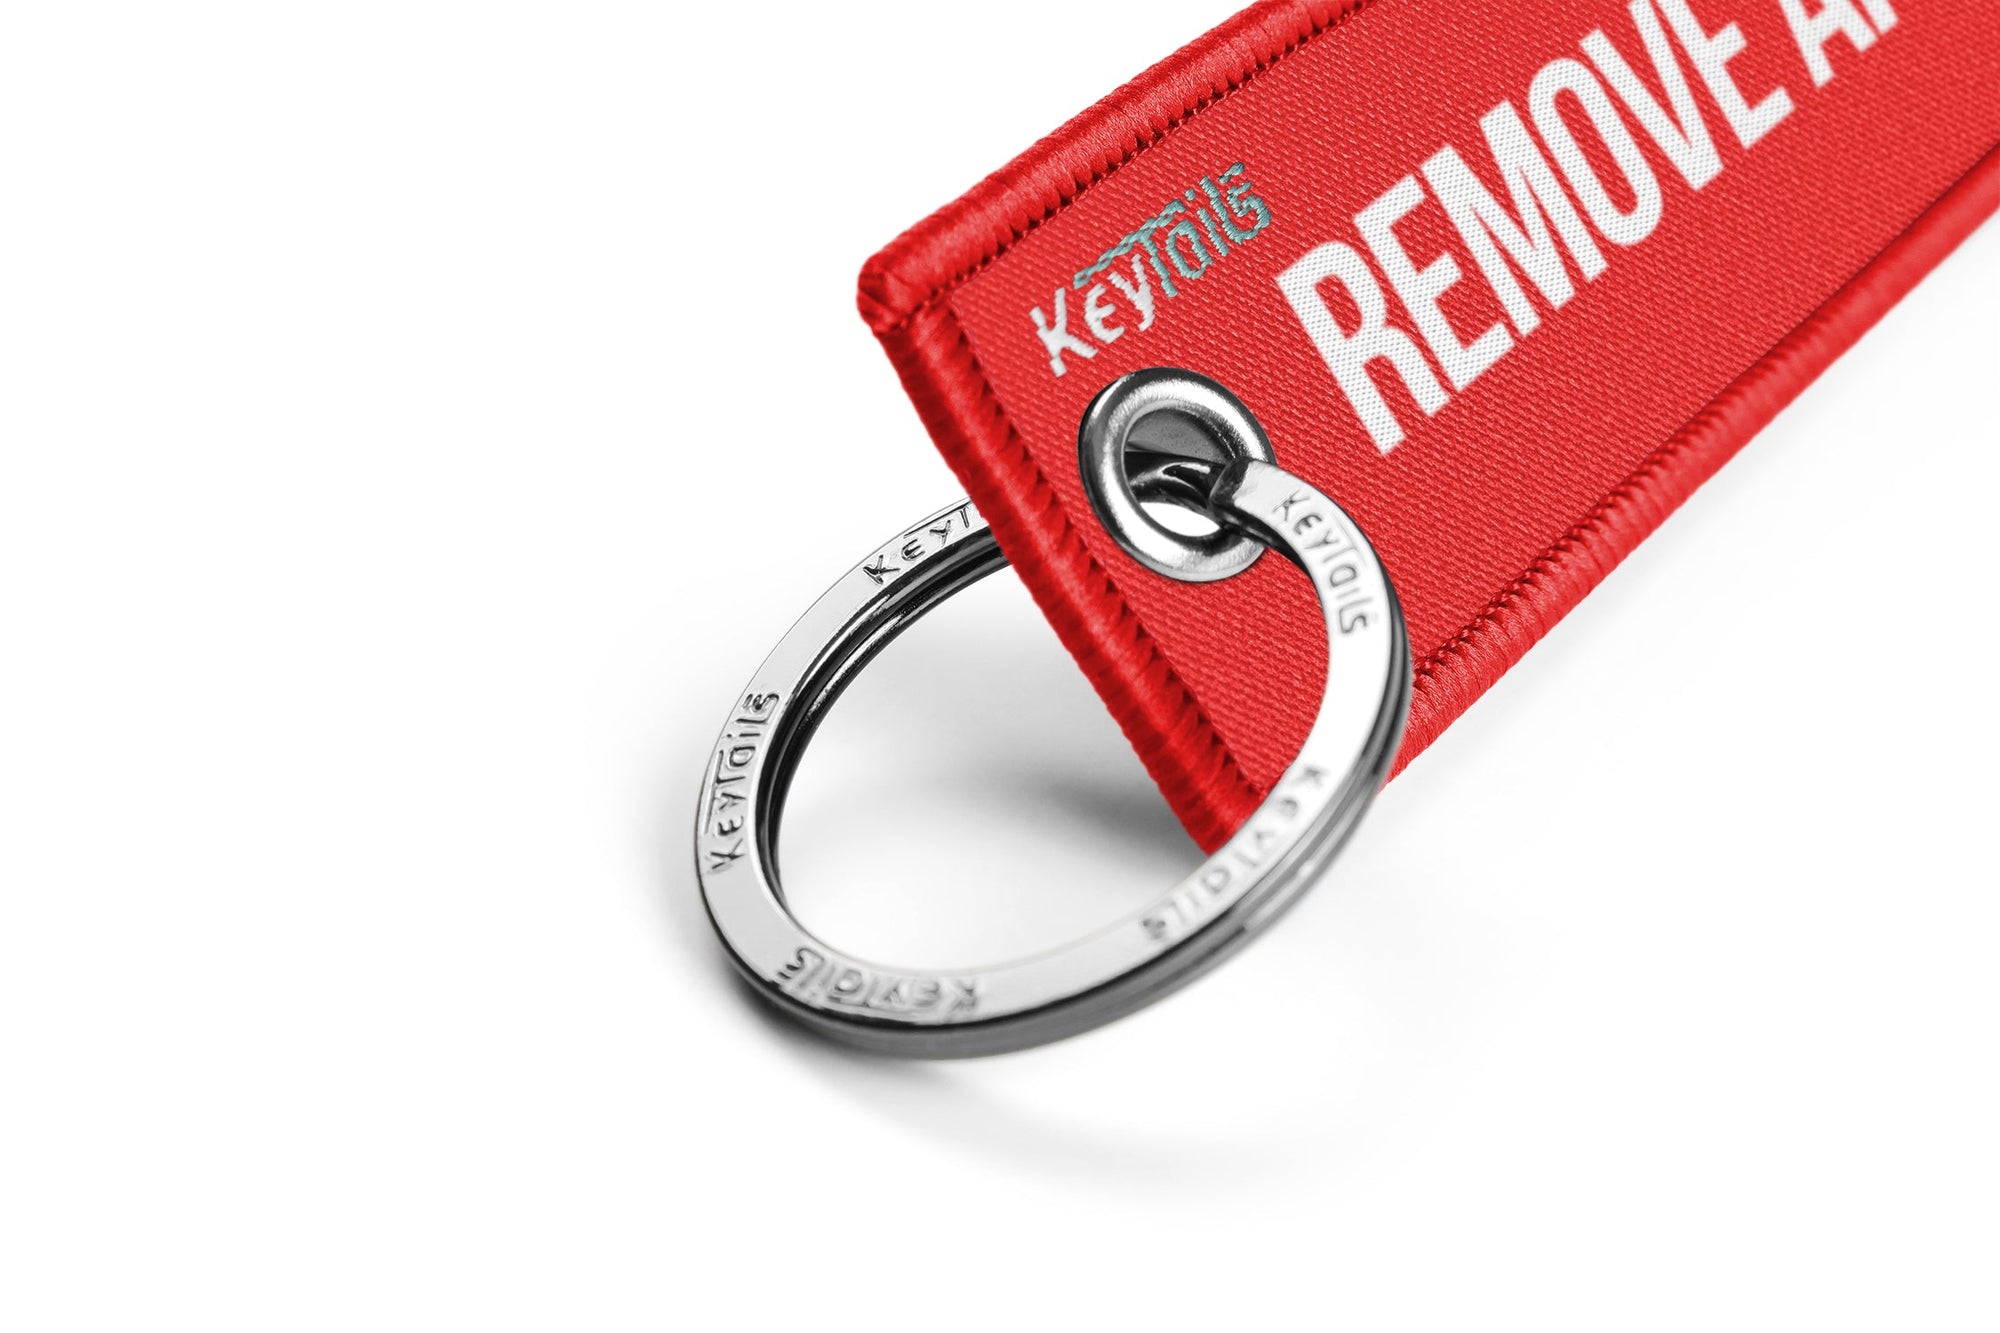 Remove After Ride Keychain, Key Tag - Remove After Ride